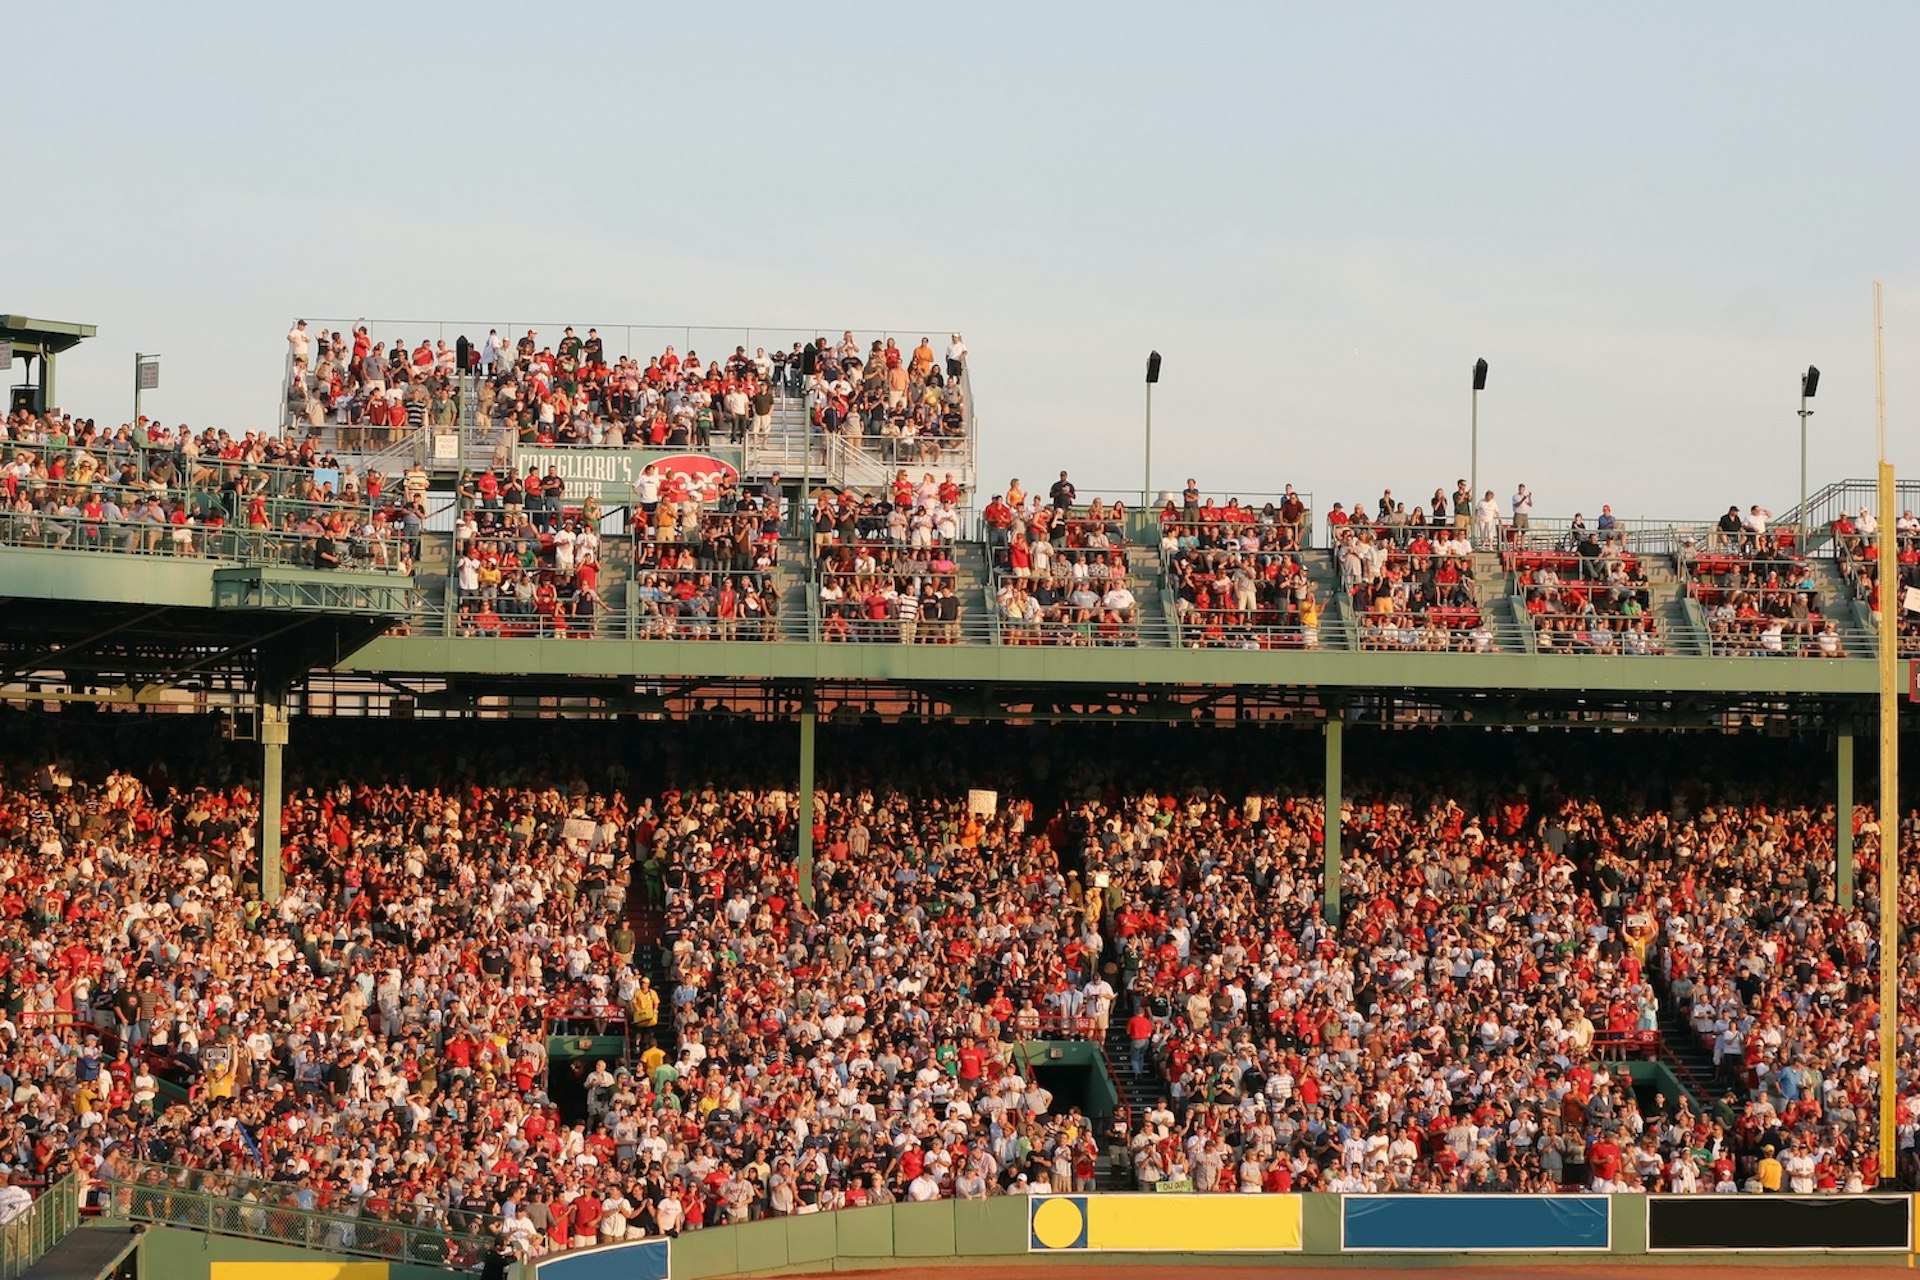 Attendees pack the bleachers at Fenway Park for a Red Sox baseball game, Boston, Massachusetts, USA